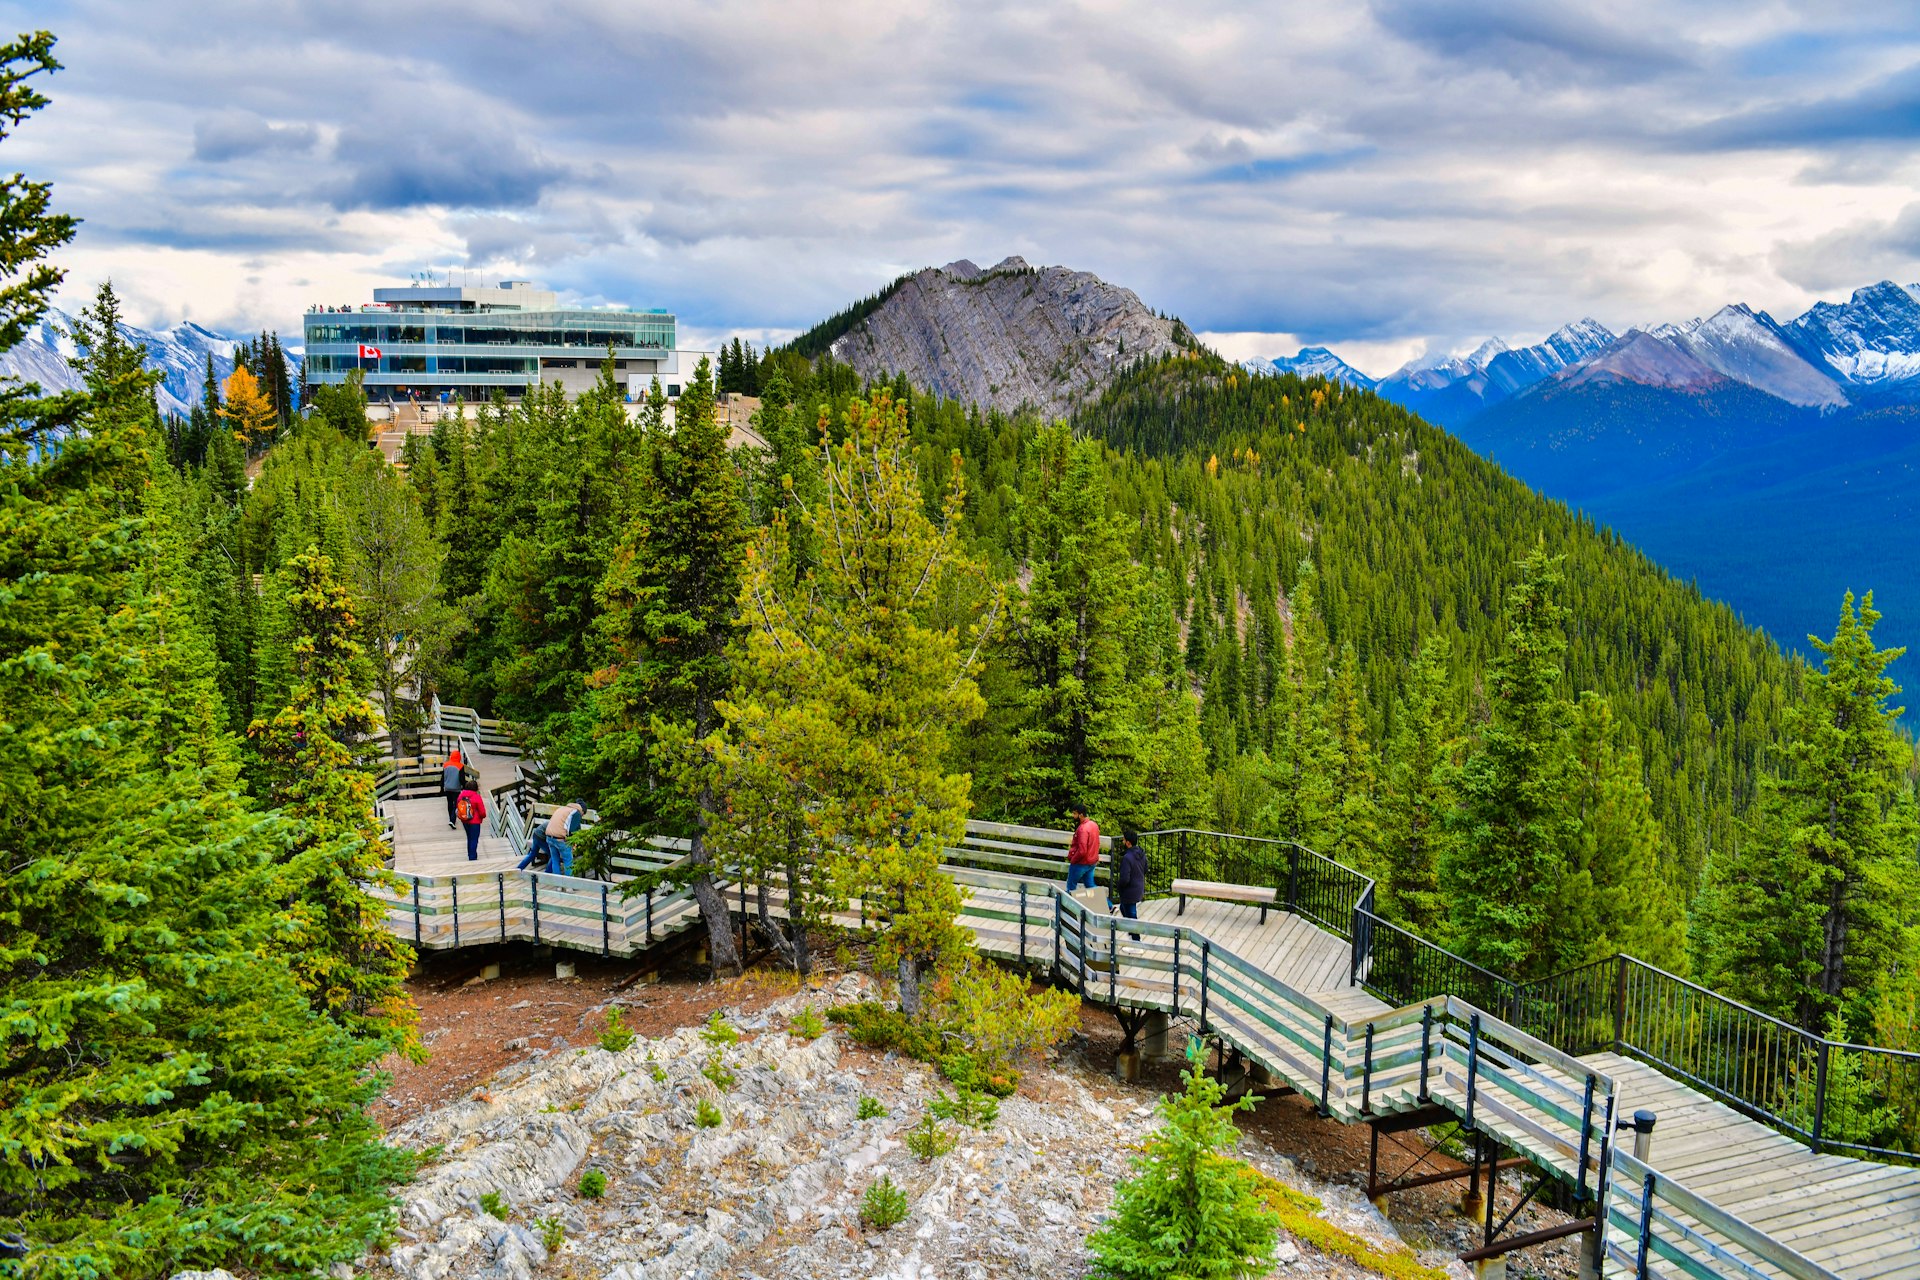 Several people are walking on a boardwalk that runs between evergreen trees; the path links Sulphur Mountain to the Banff upper gondola station